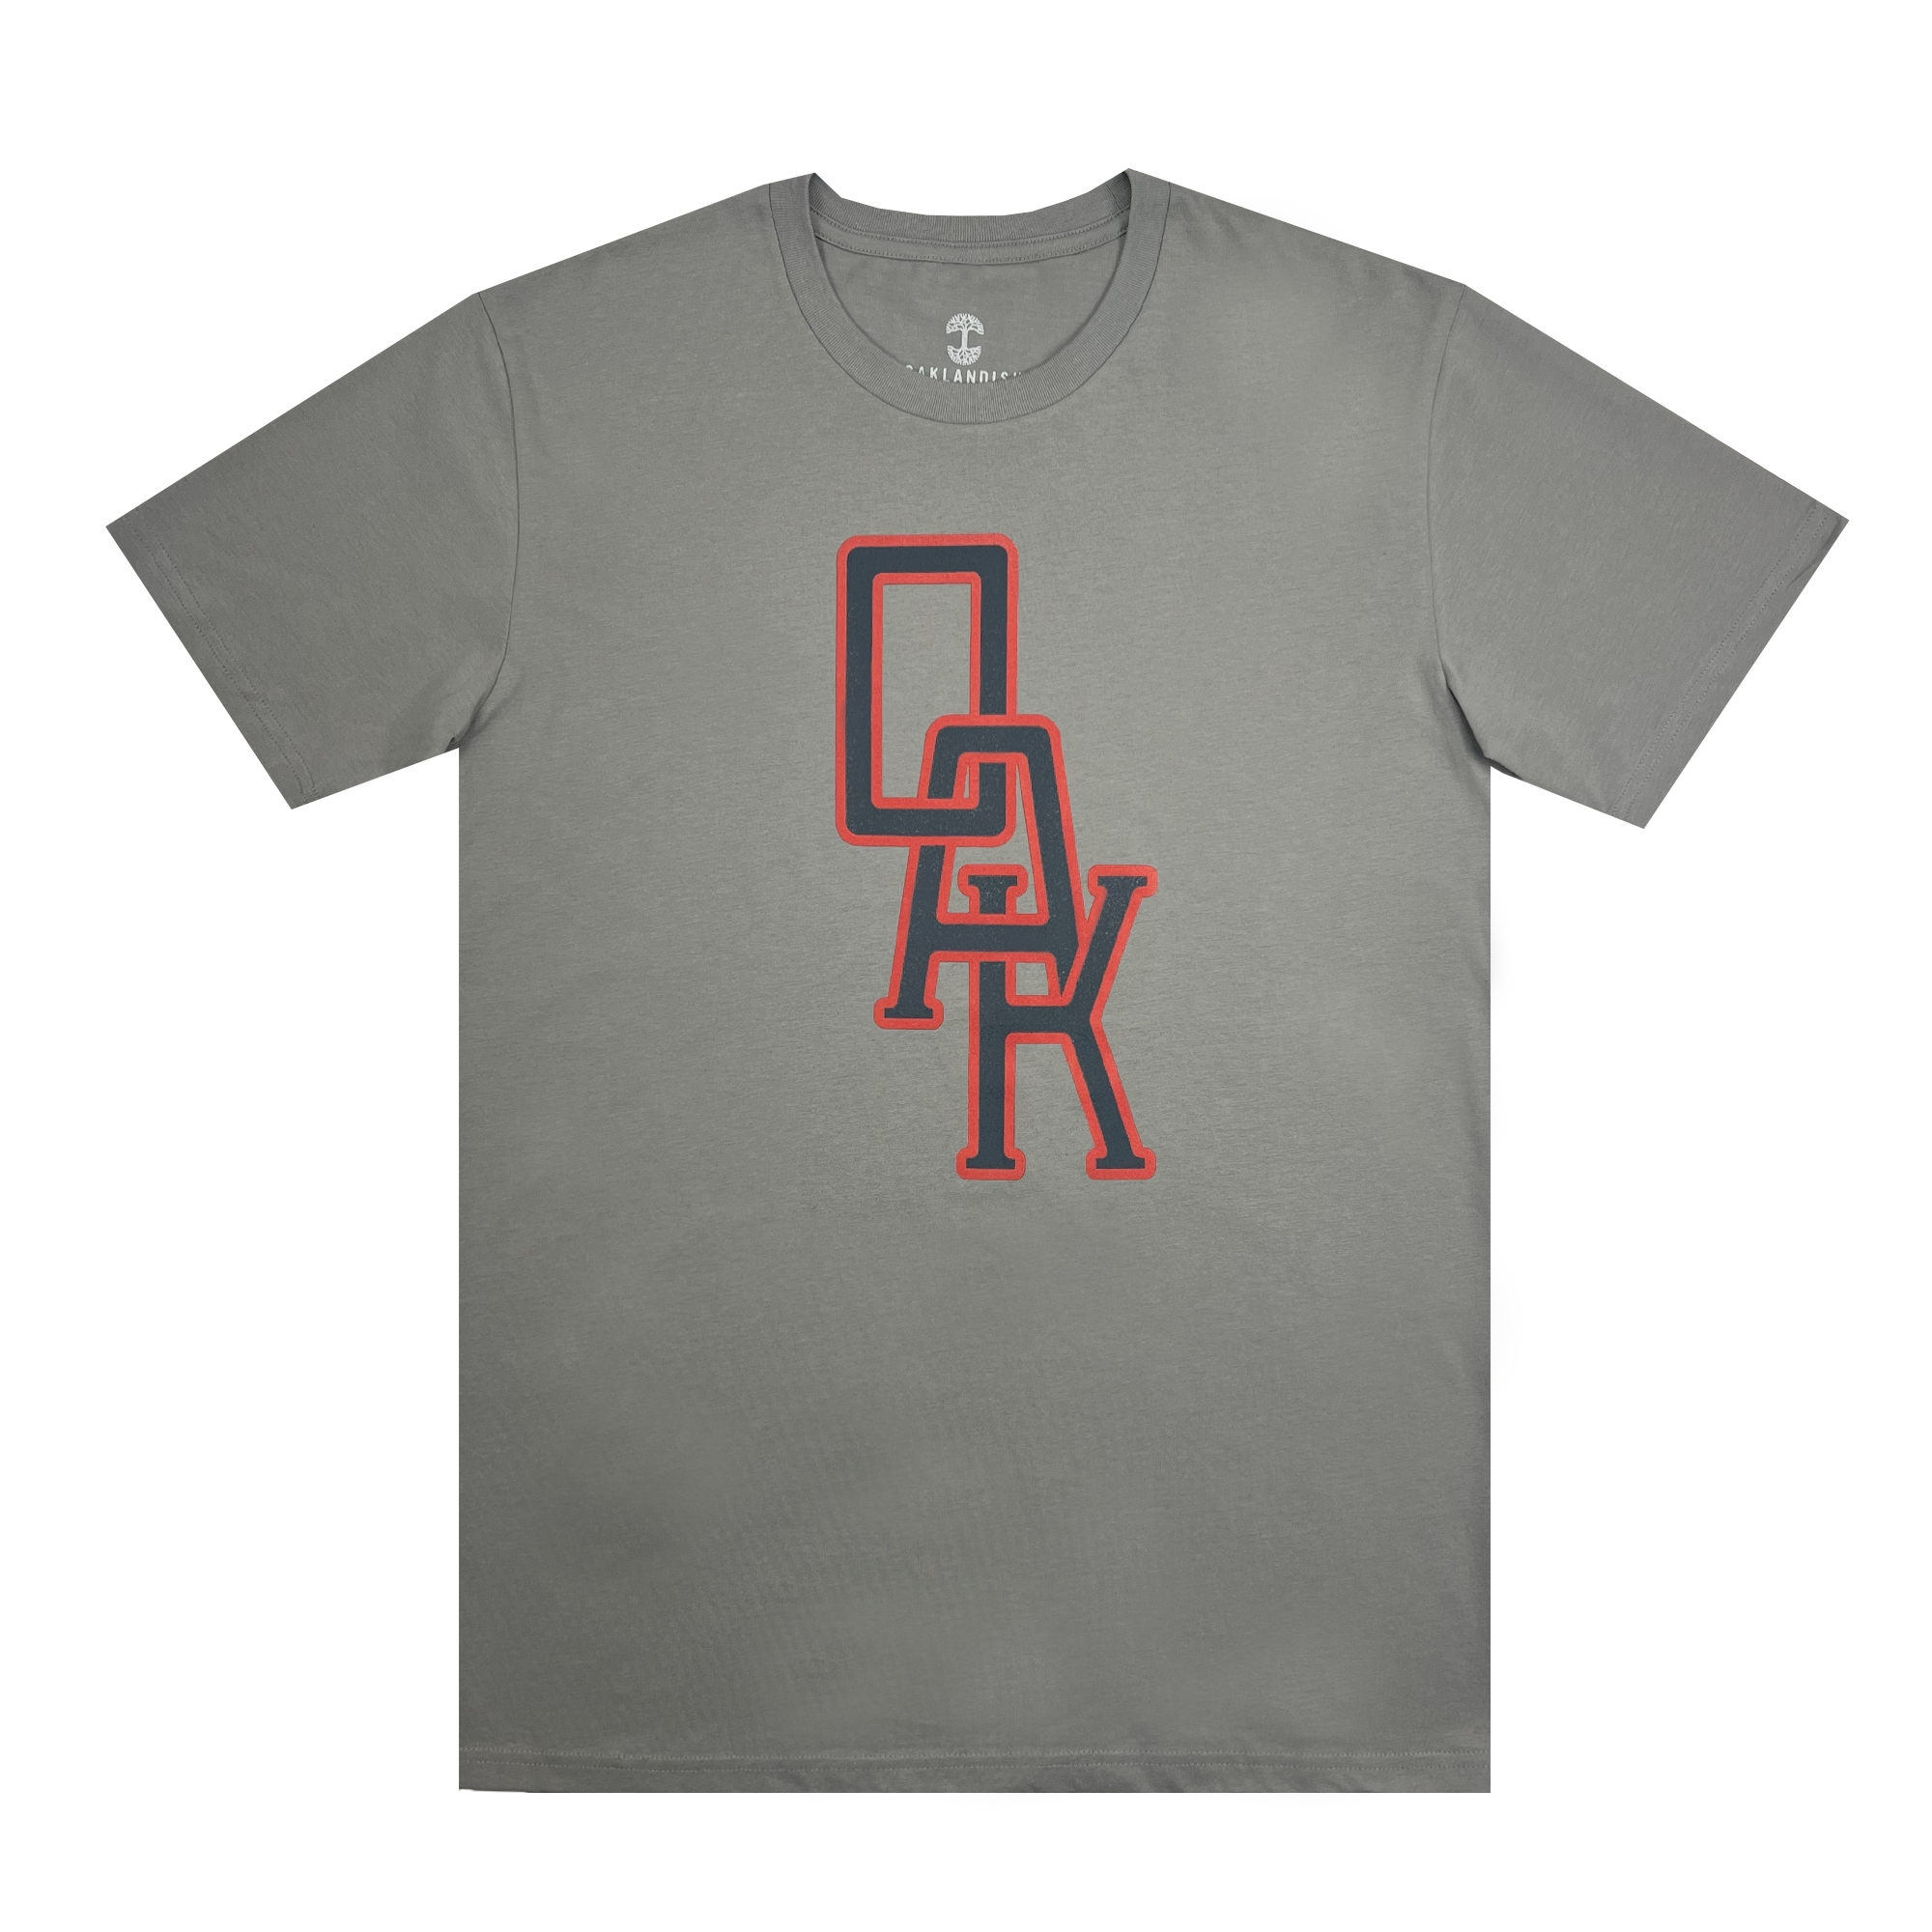 Front view of a grey t-shirt with OAK monogram design centered in Navy and red.